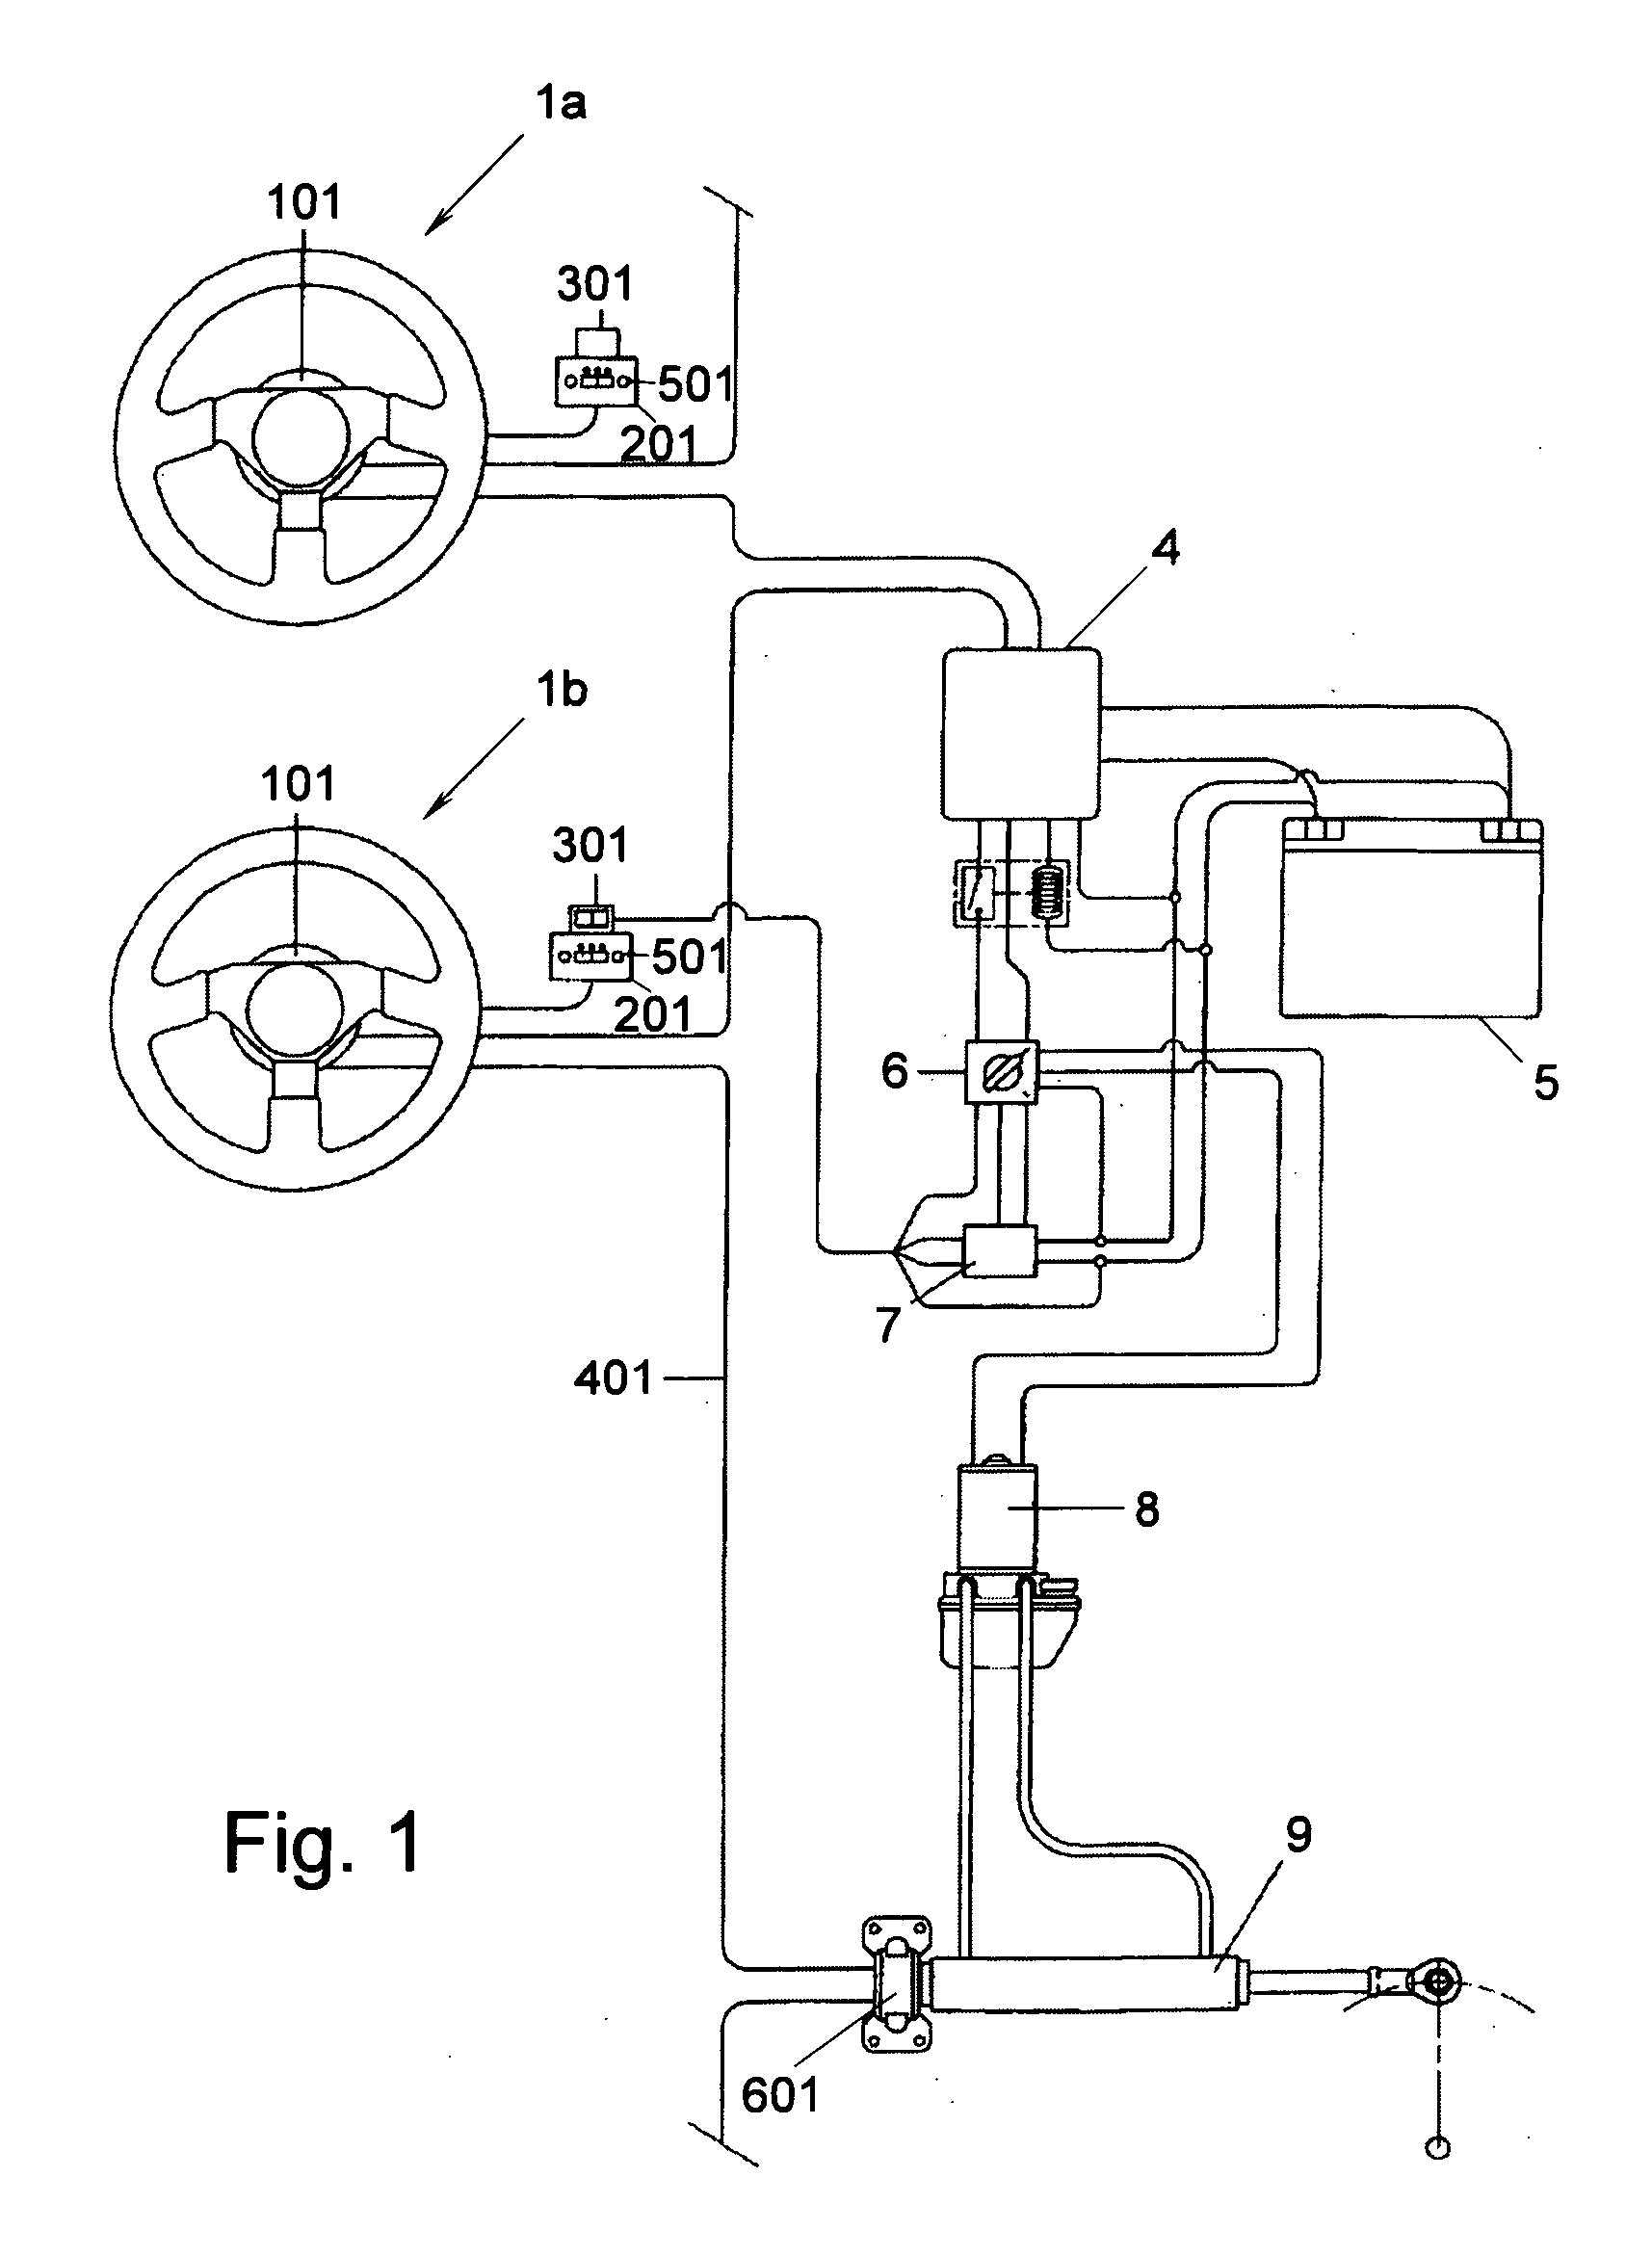 Directional control system and method for marine vessels, such as ships and the like